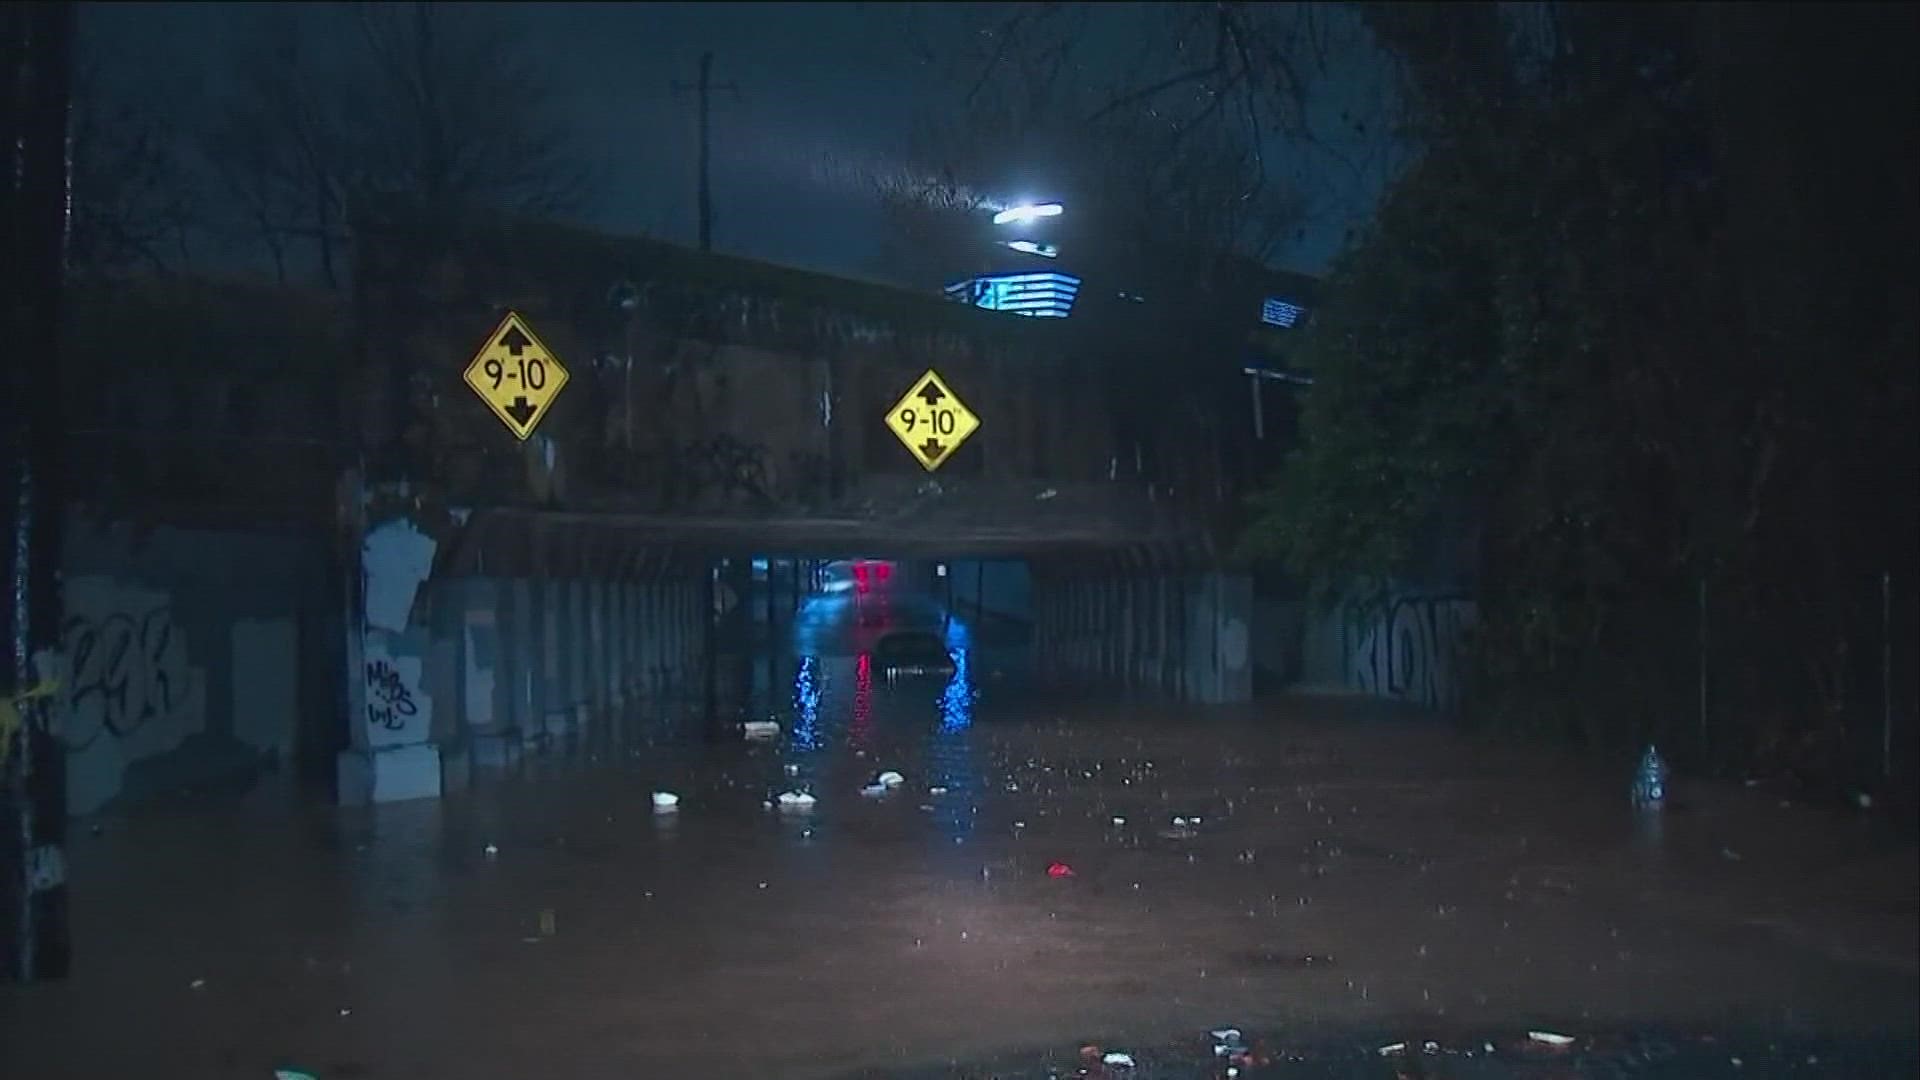 Flooded roadways have been spotted across metro Atlanta as a band of storms moves through.